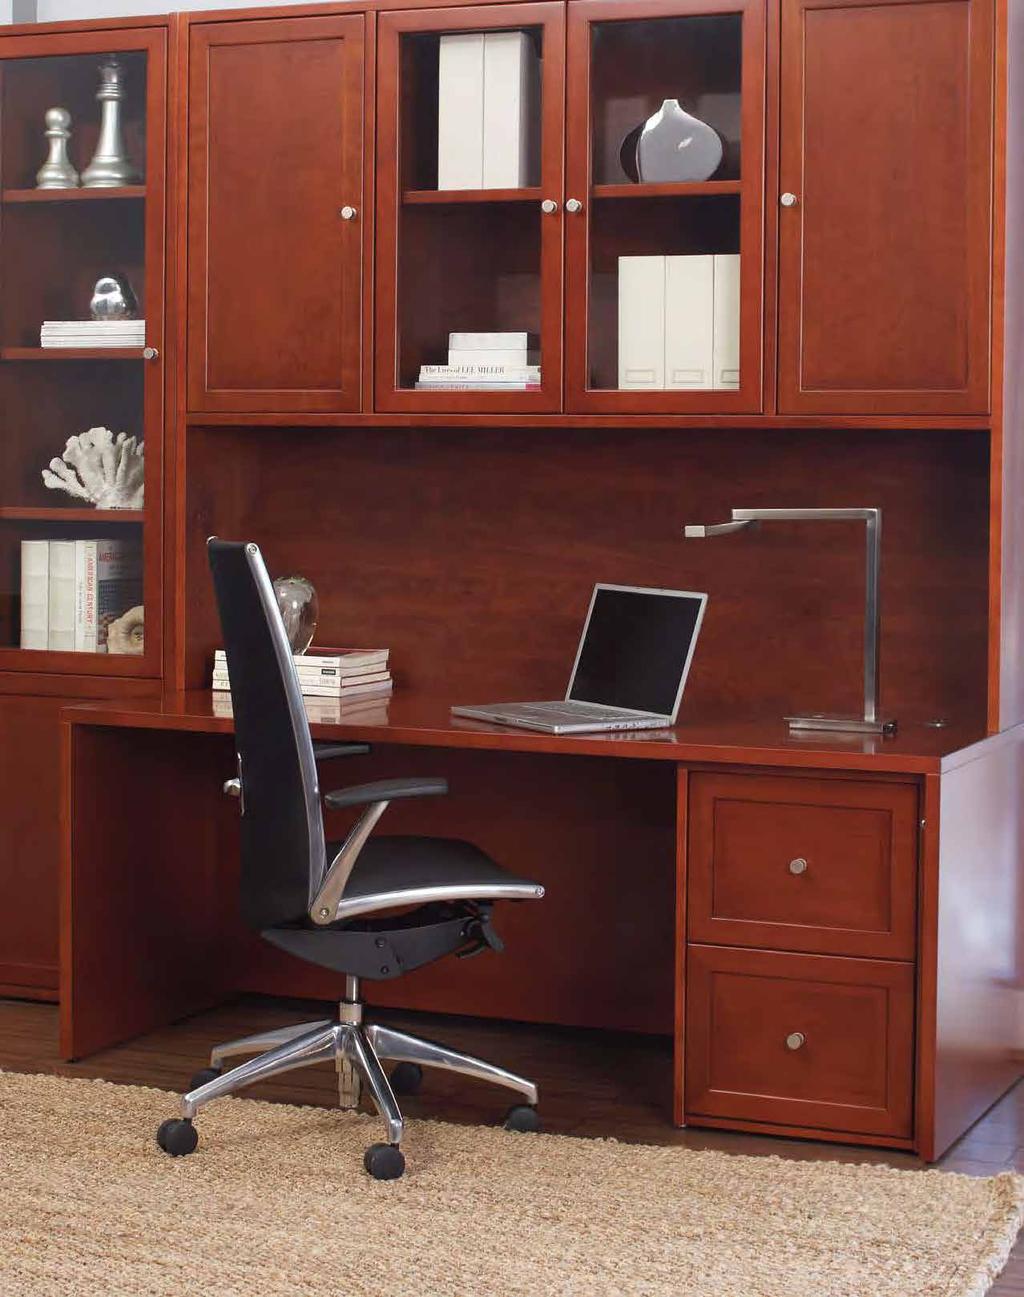 OFFICE Real Wood Makes The Difference.